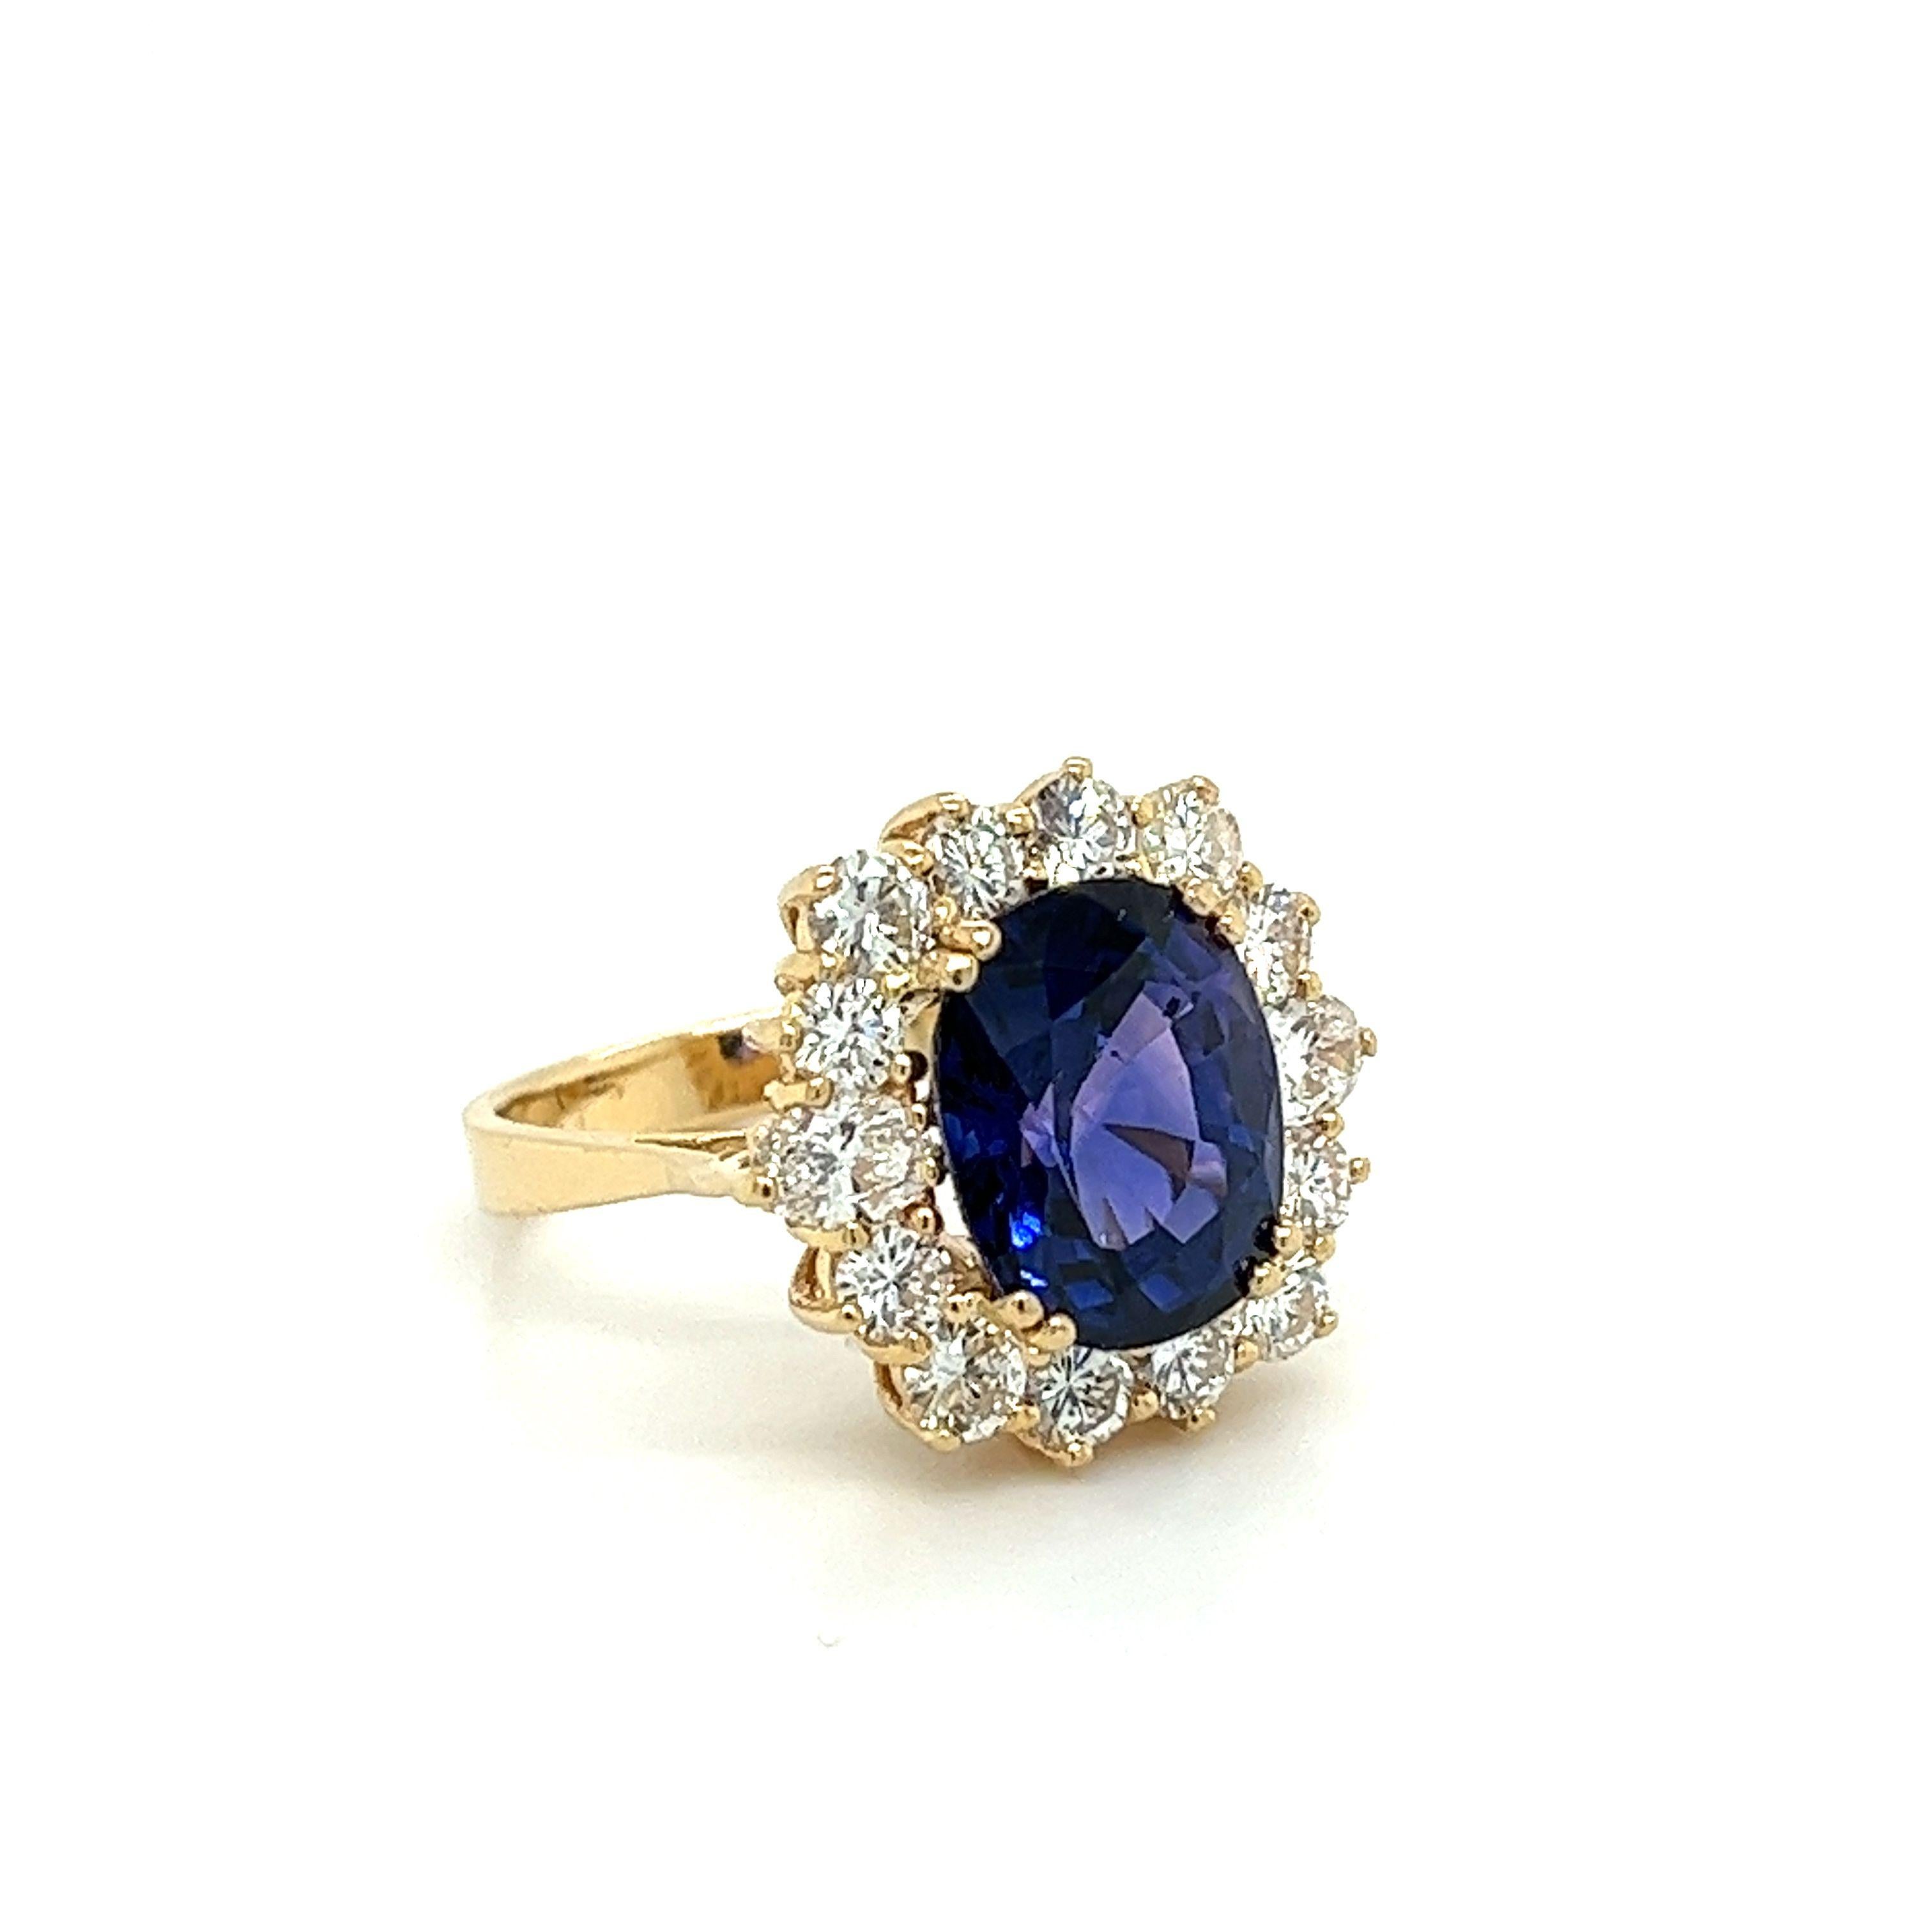 7.2 carat oval cut natural Blue Sapphire and round/oval diamond halo ring in 14 karat yellow gold. The sapphire truly radiates a vivid, rich blue color hue, especially under sunlight. The mixed-cut round and oval shape diamond halo offer excellent